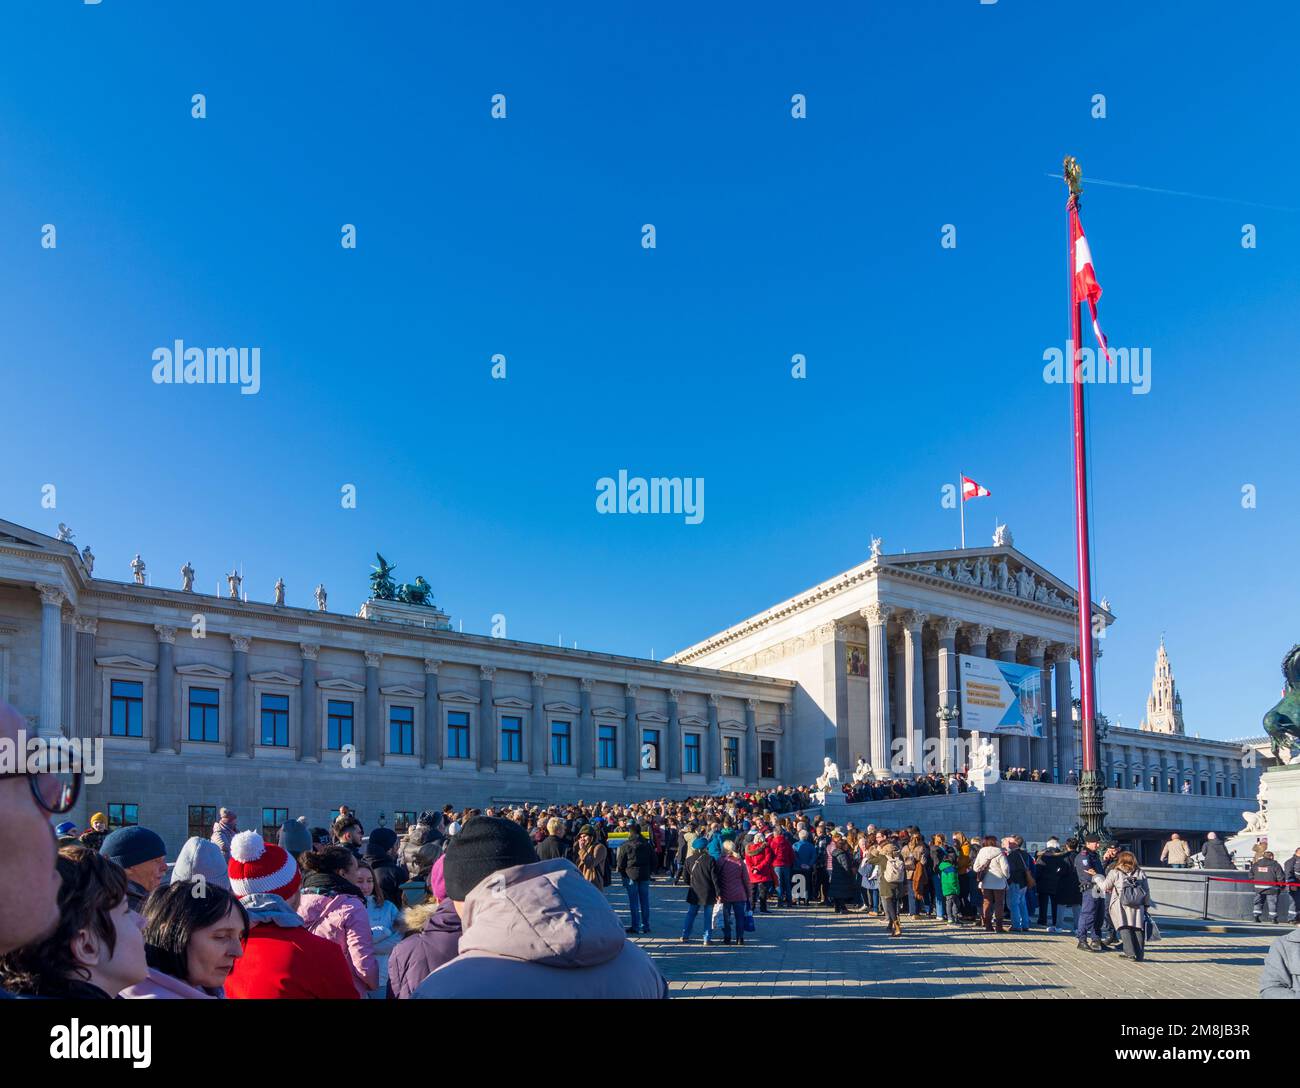 Wien, Vienna: people line up waiting in front of new opened Austrian parliament at open day 'Tag der offenen Tür' in 01. Old Town, Wien, Austria Stock Photo